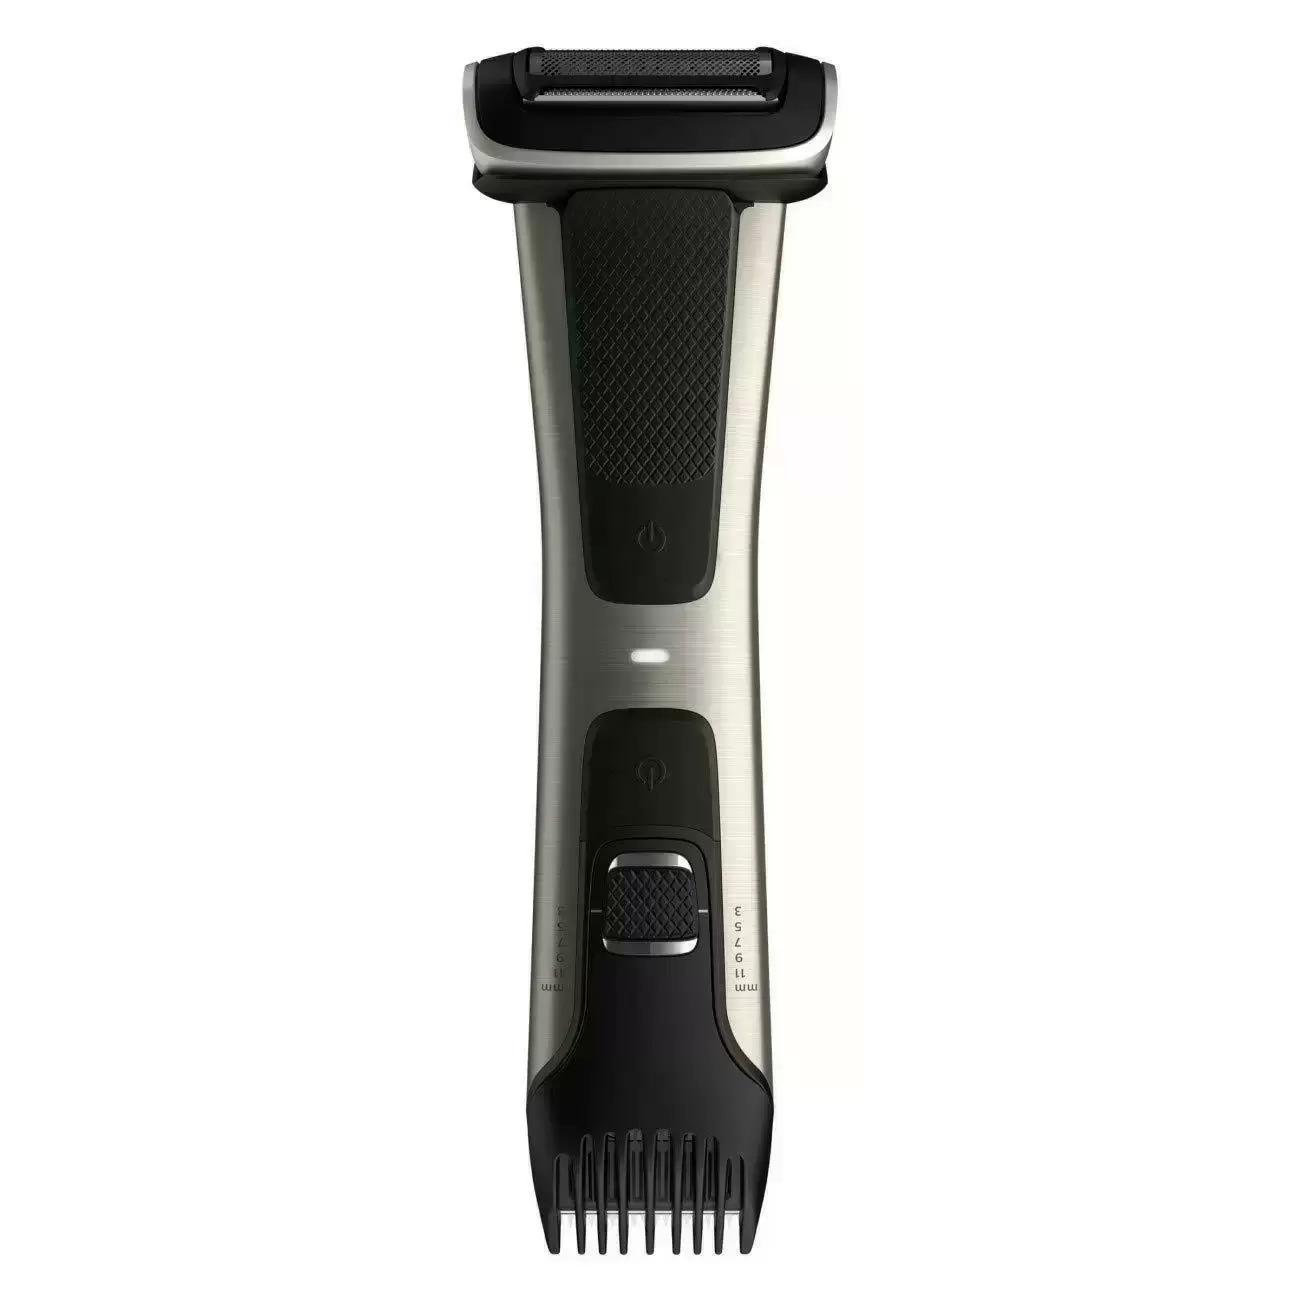 Philips Norelco Bodygroom 7000 Series Body Trimmer for $47.66 Shipped